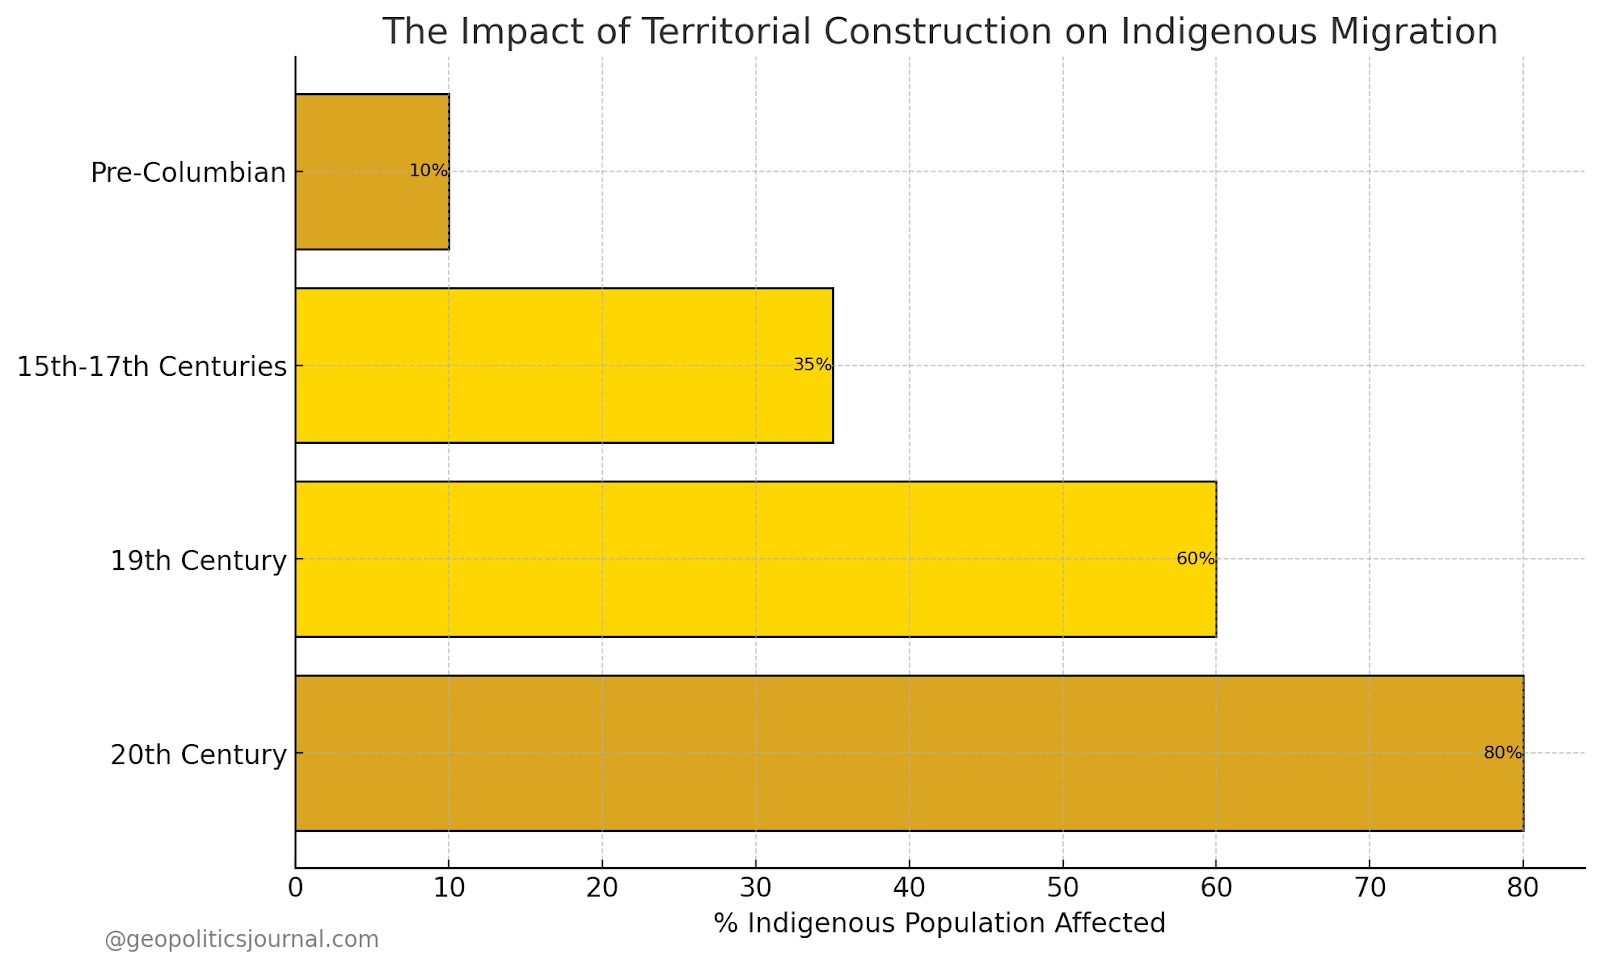 The chart represents the percentage of the indigenous population affected by migration due to territorial construction across different historical eras in the Americas. Starting from the Pre-Columbian period and extending to the 20th century, the graph showcases an increasing impact, highlighting the significant influence of territorial changes on indigenous communities.